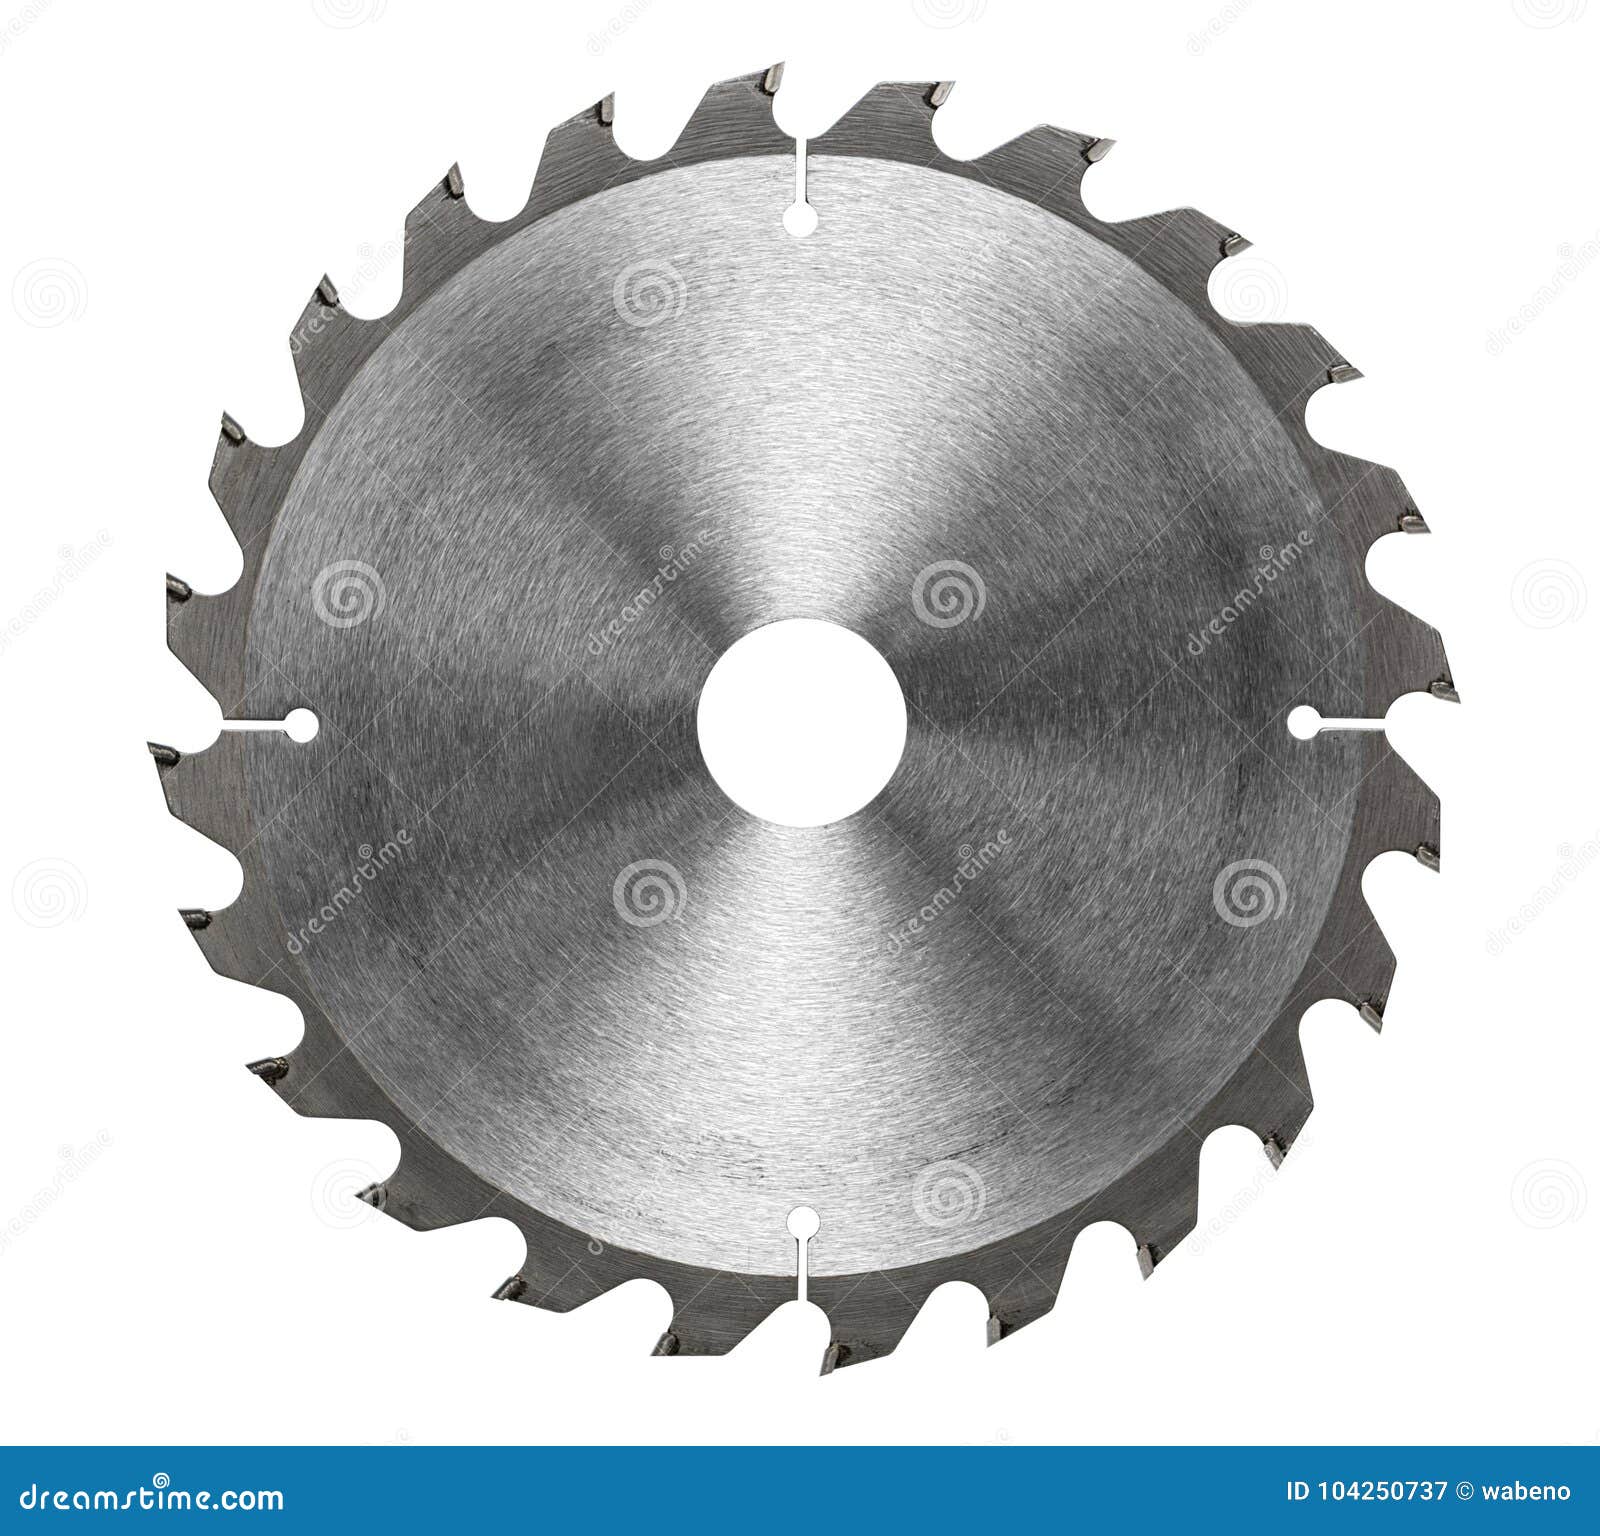 https://thumbs.dreamstime.com/z/circular-saw-blade-wood-work-isolated-white-included-clipping-path-104250737.jpg